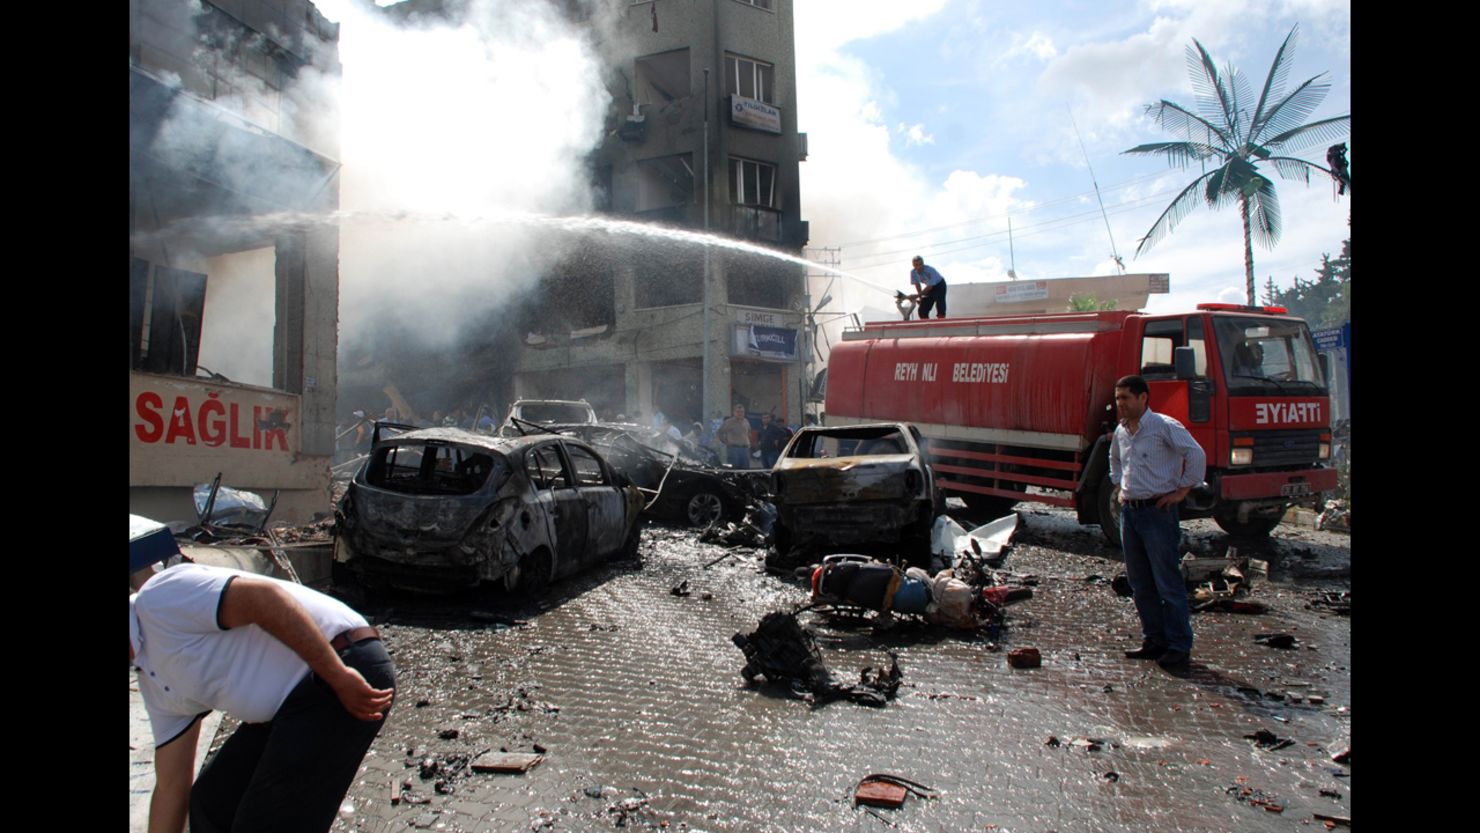 Emergency crews work to put out a fire near the town hall in Reyhanli after a car bomb exploded Saturday, May 11, 2013.